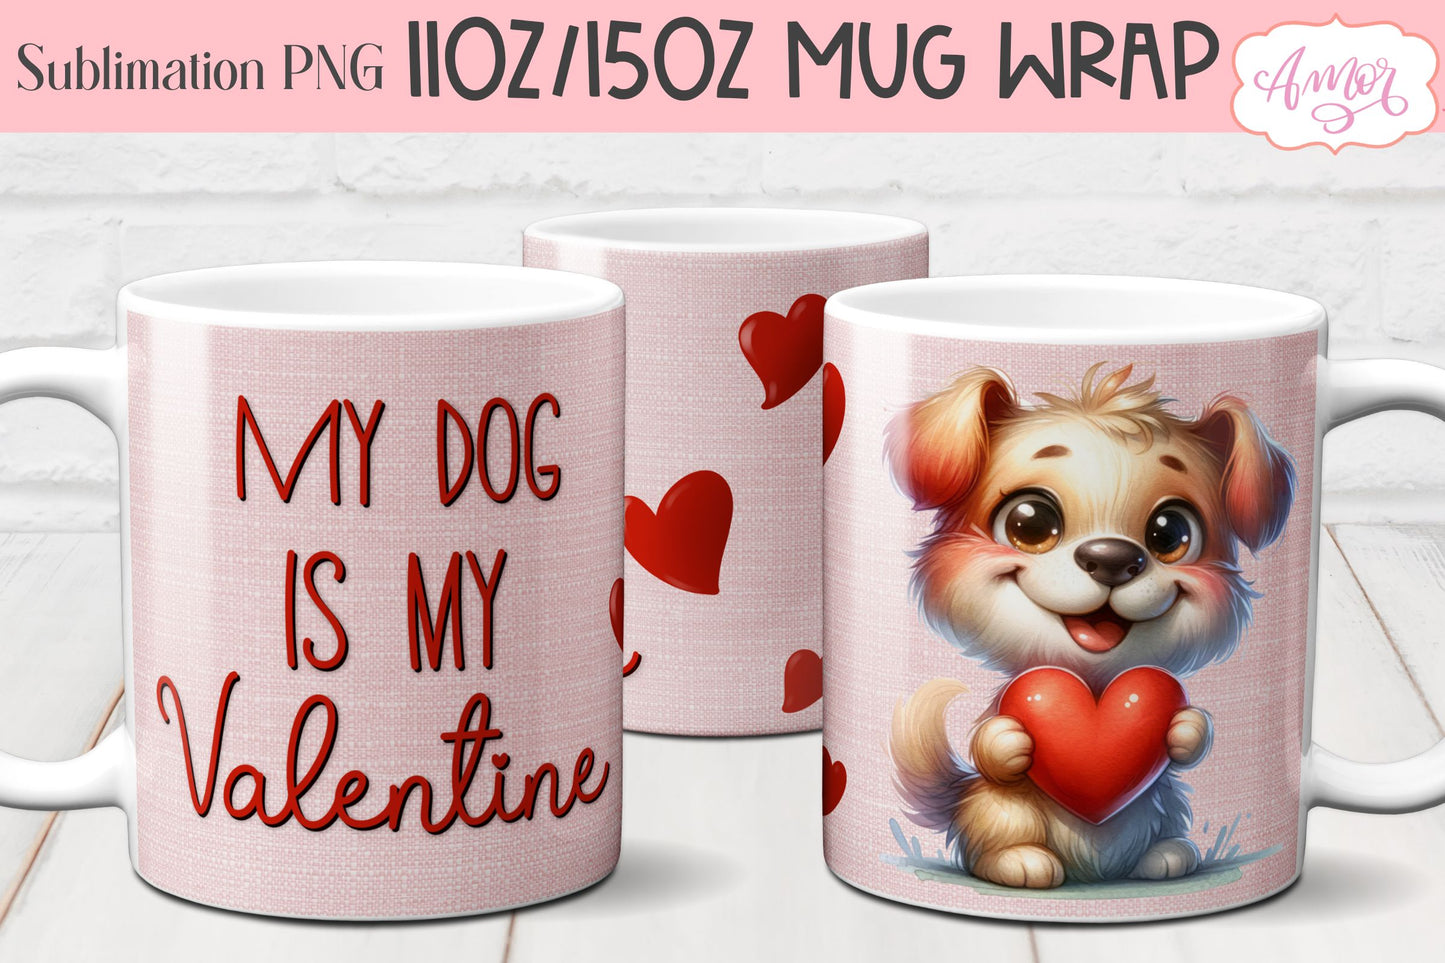 My dog is my valentine mug Wrap PNG for Sublimation